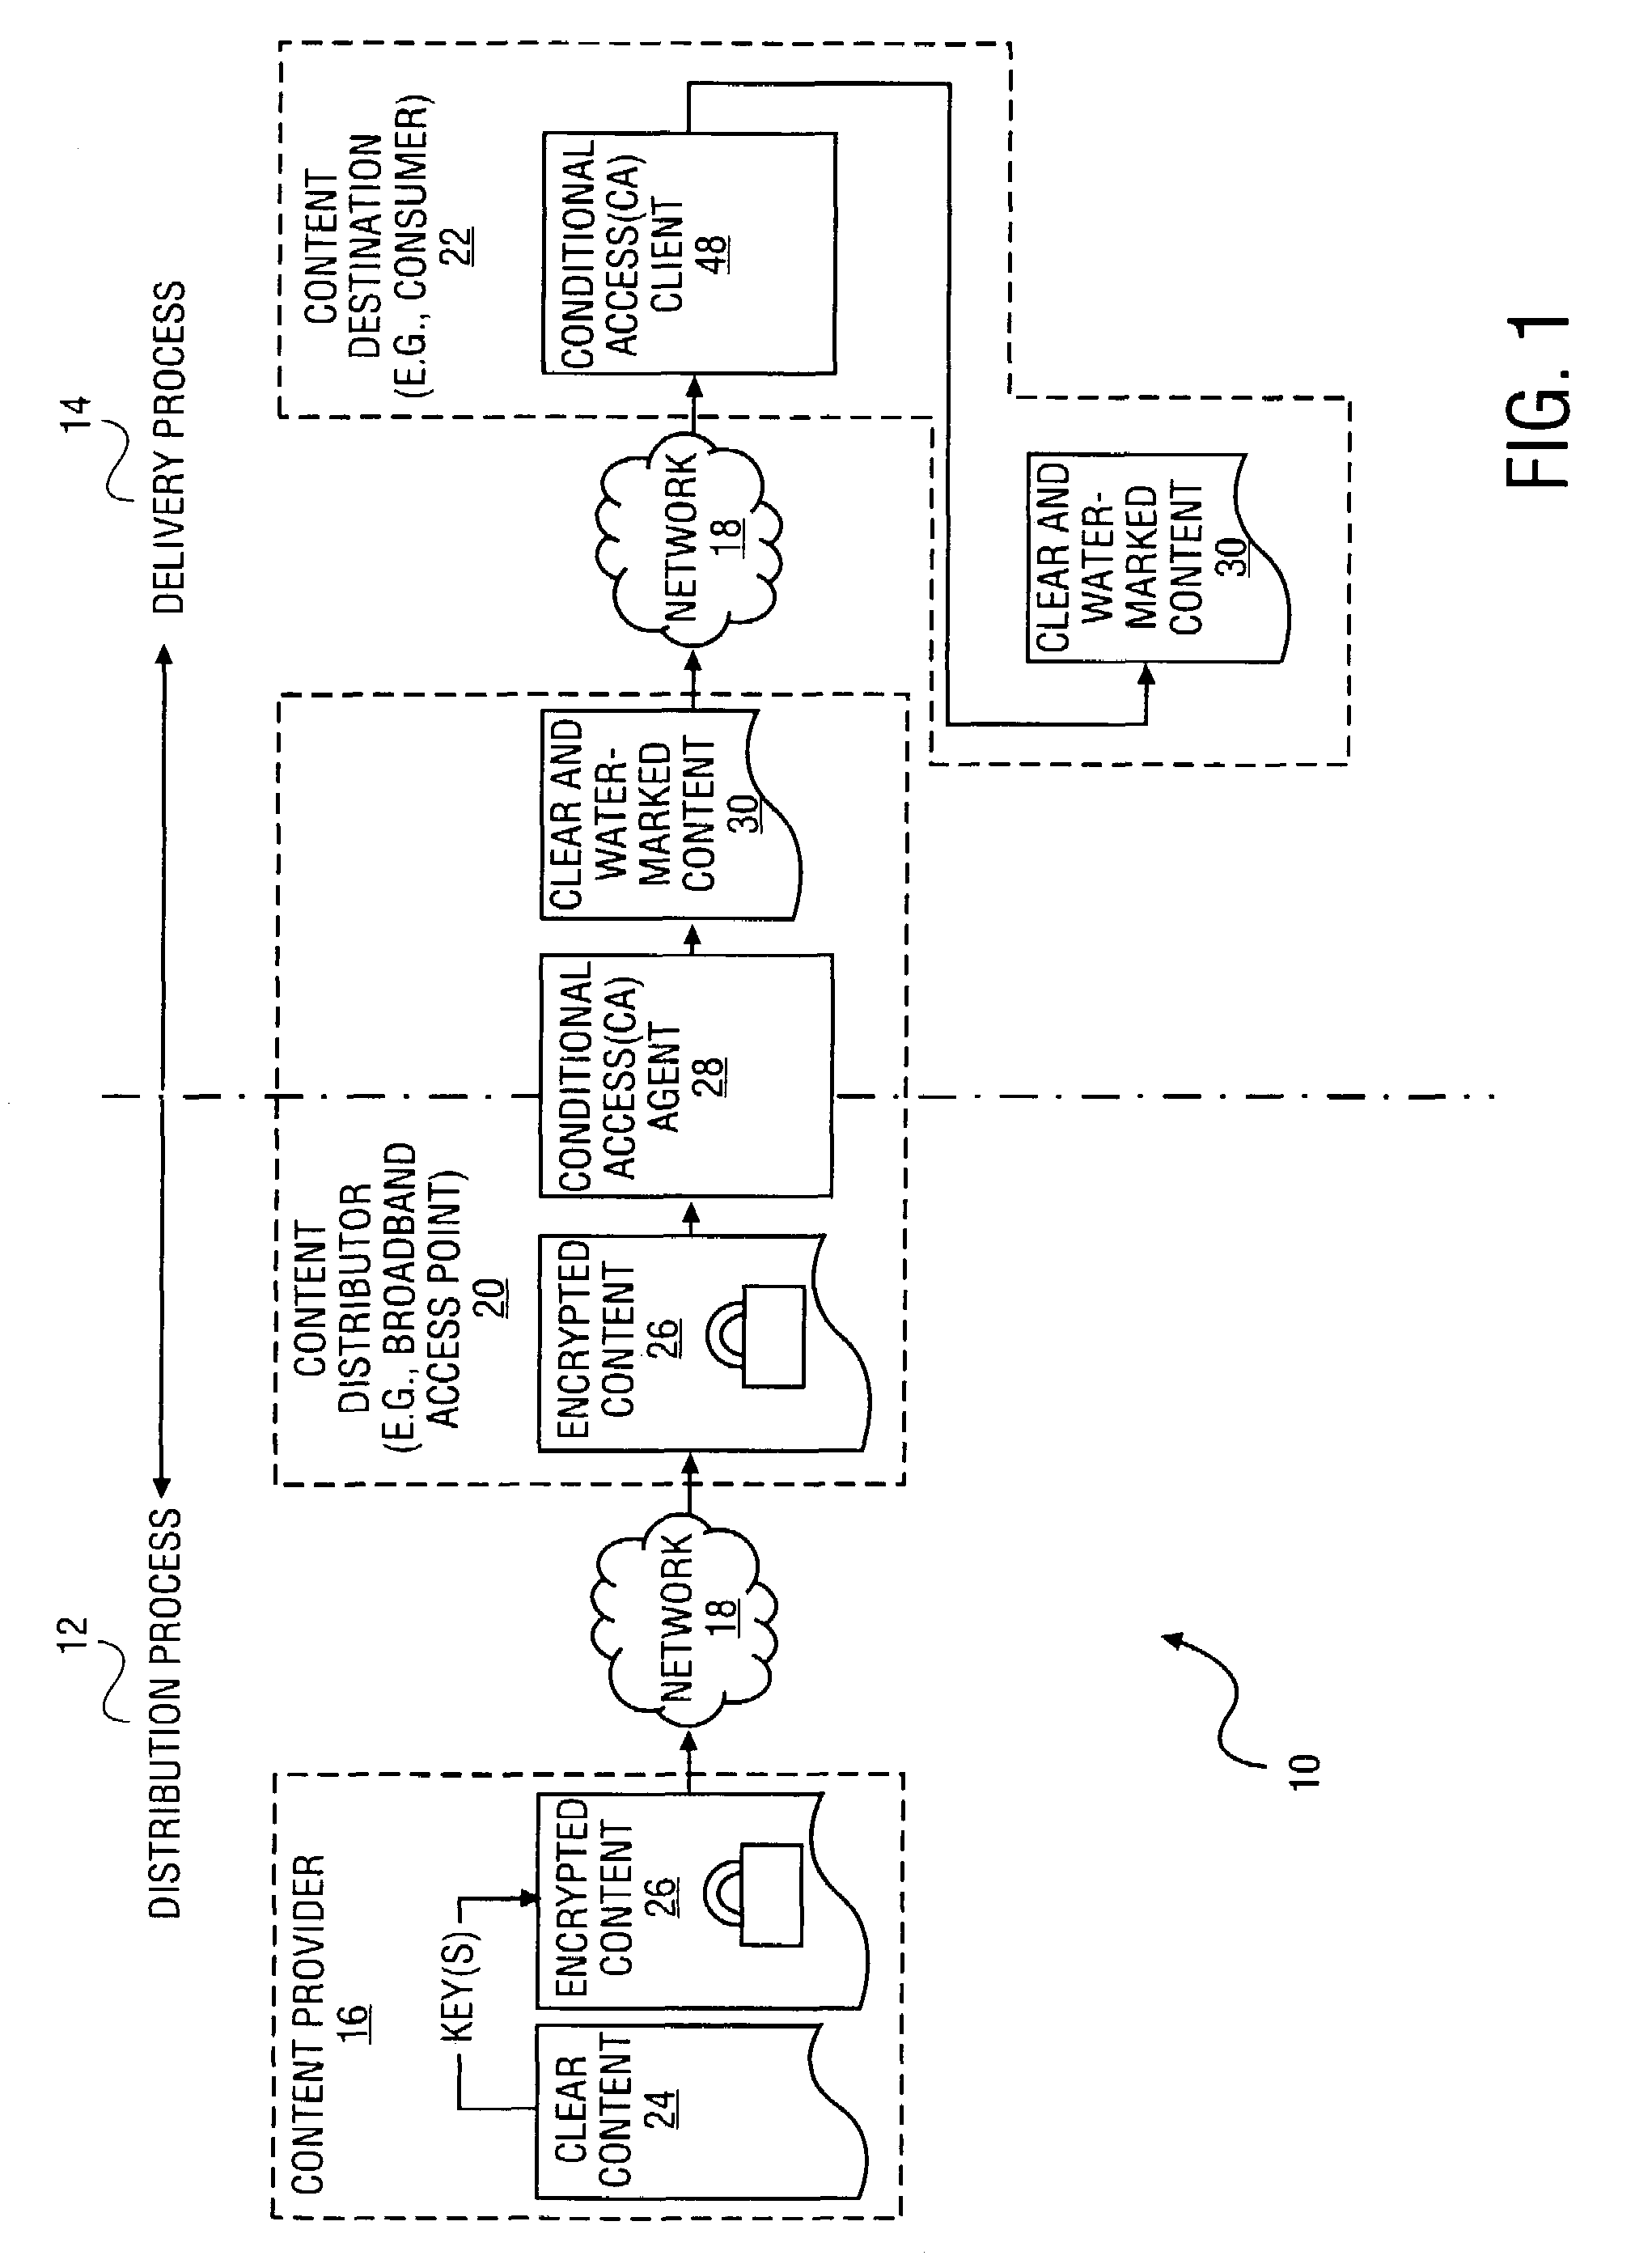 Method and system to securely distribute content via a network